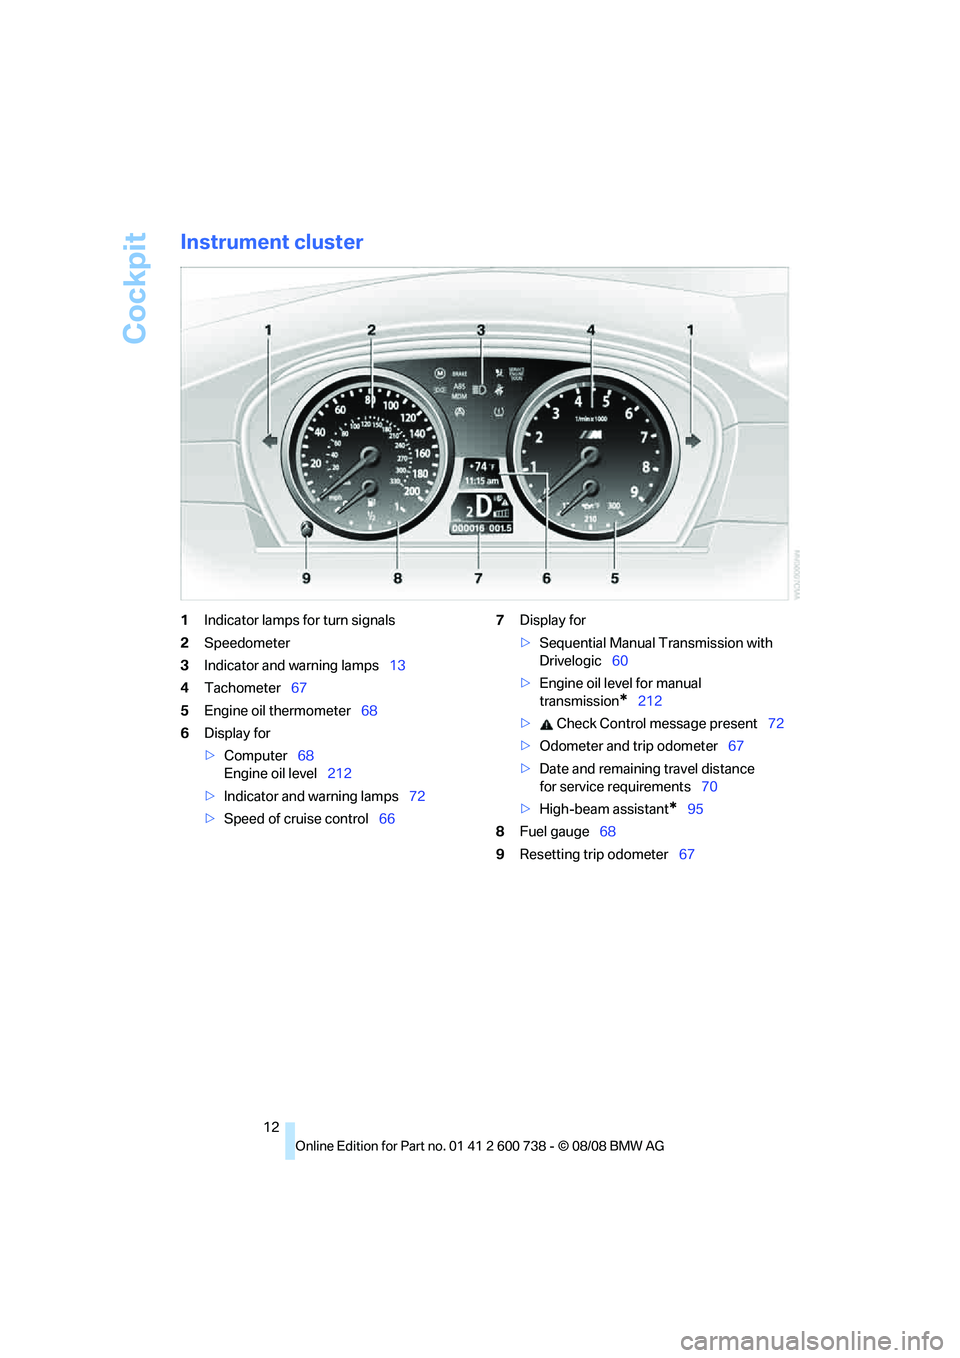 BMW M5 2010  Owners Manual Cockpit
12
Instrument cluster
1Indicator lamps for turn signals
2Speedometer
3Indicator and warning lamps13
4Tachometer67
5Engine oil thermometer68
6Display for
>Computer68
Engine oil level212
>Indica